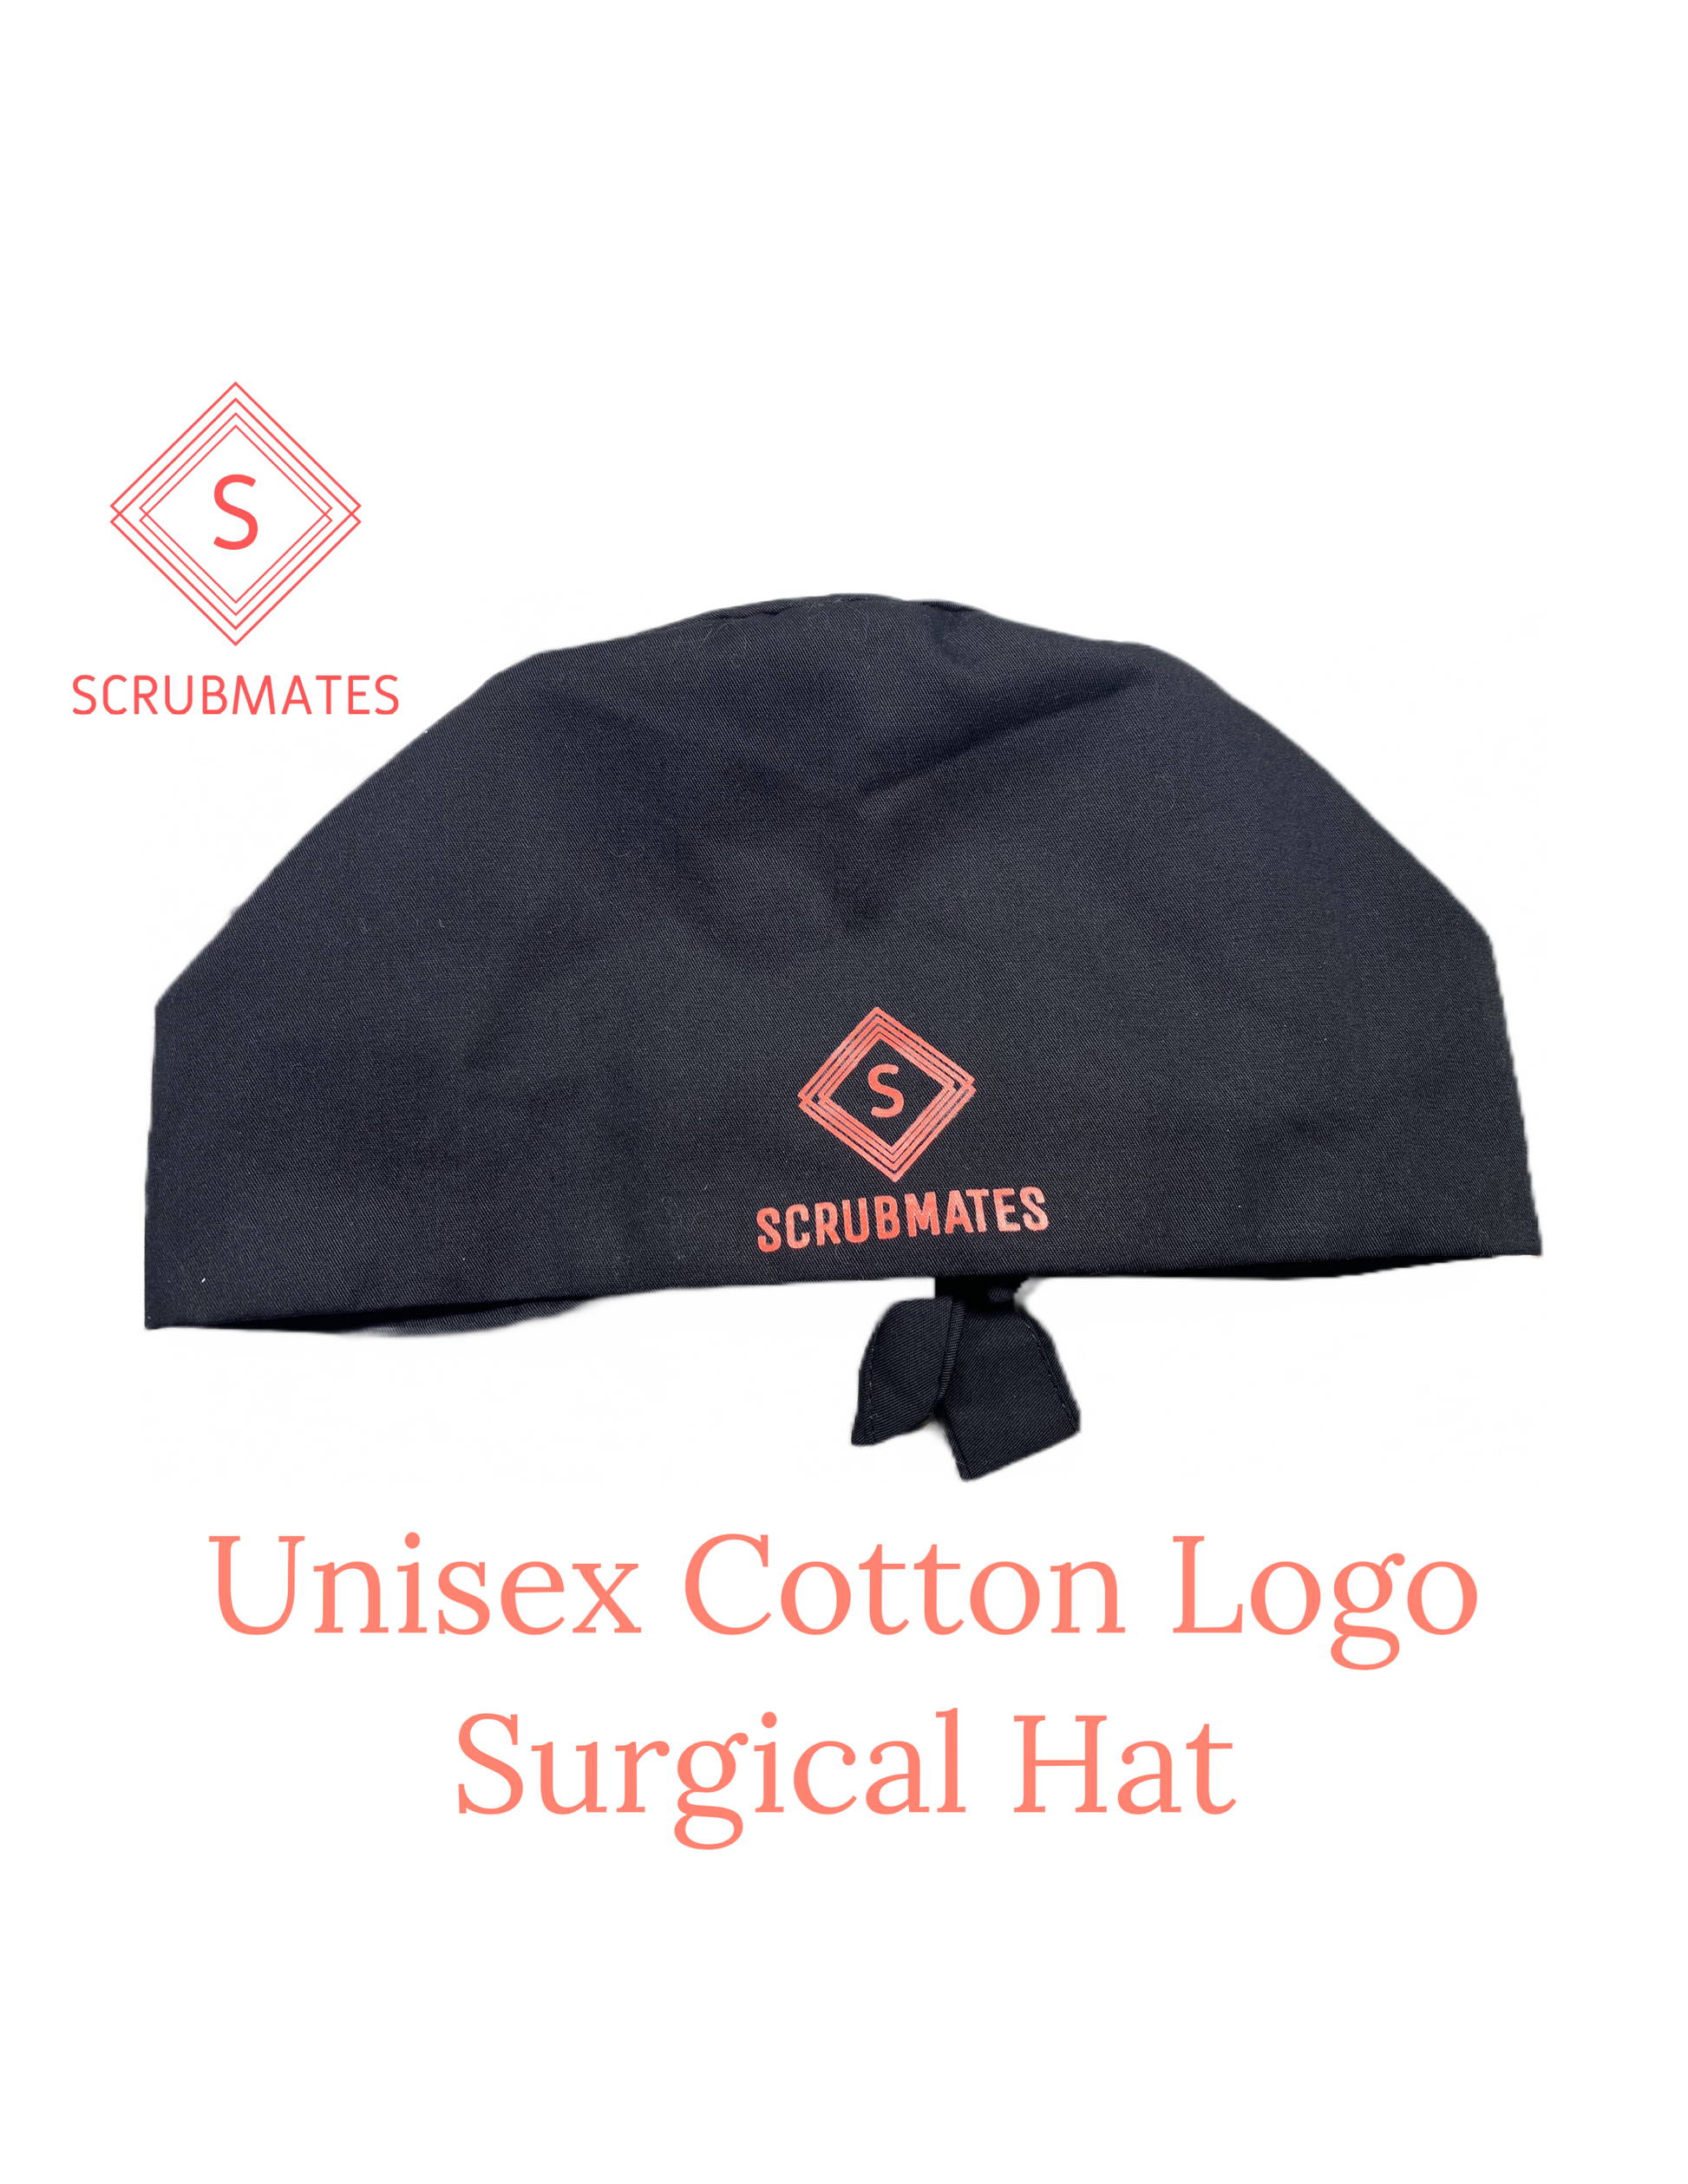 Scrubmates unisex logo scrub hat for men and women with modern, classic fit and sweat band with adjustable tieback. Made to protect your hair as well as provide all day comfort black